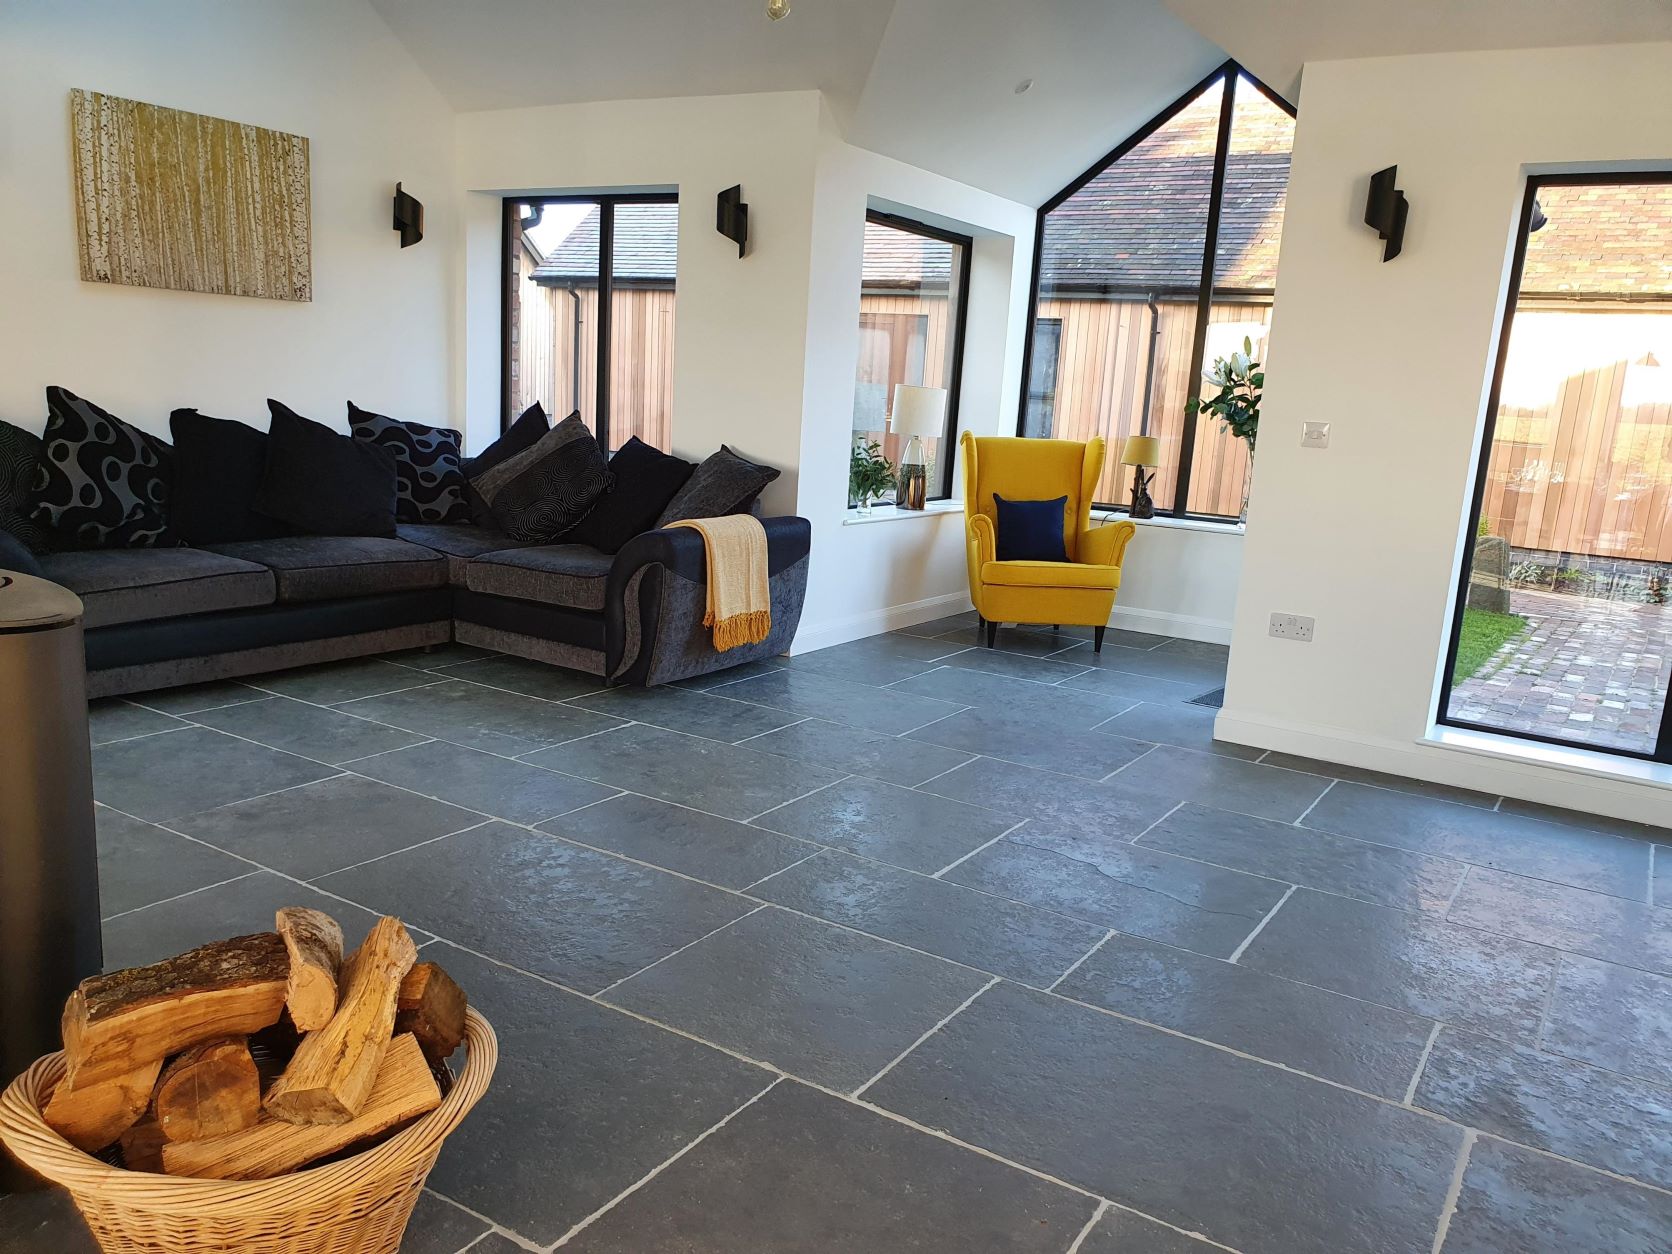 Stone Flooring - Not just for kitchens!